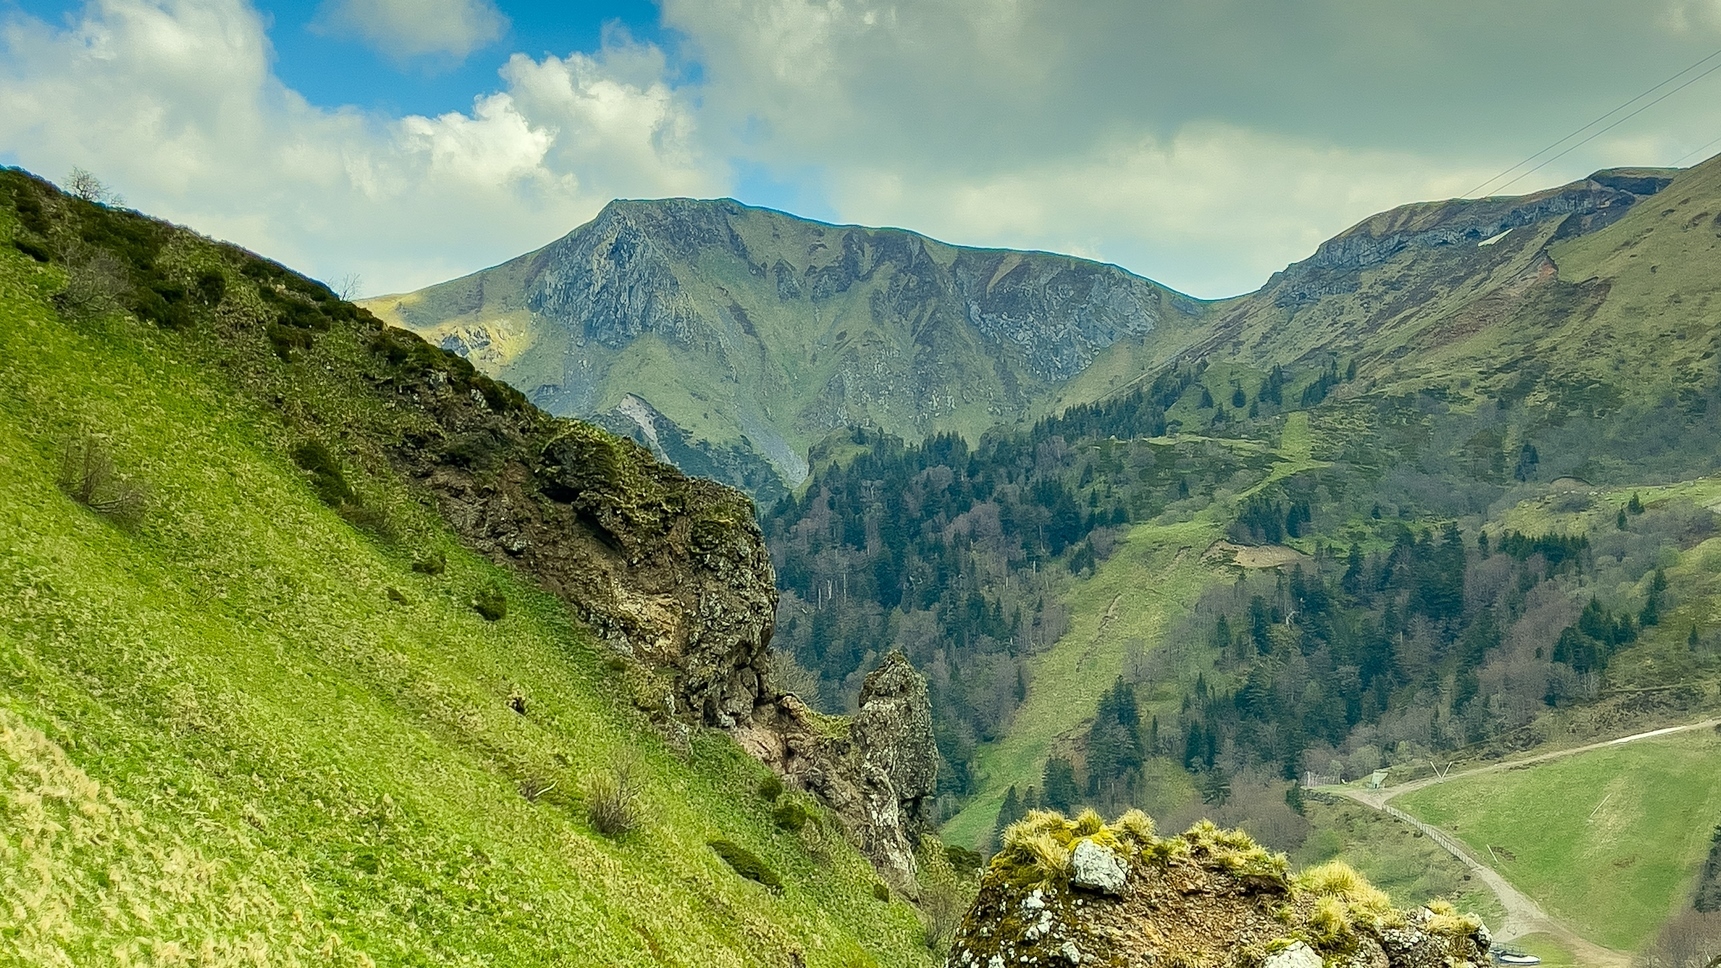 Massif du Sancy, the Valley of the Val d'enfer in the Massif du Sancy in Auvergne with a view of the Roc de Cuzeau